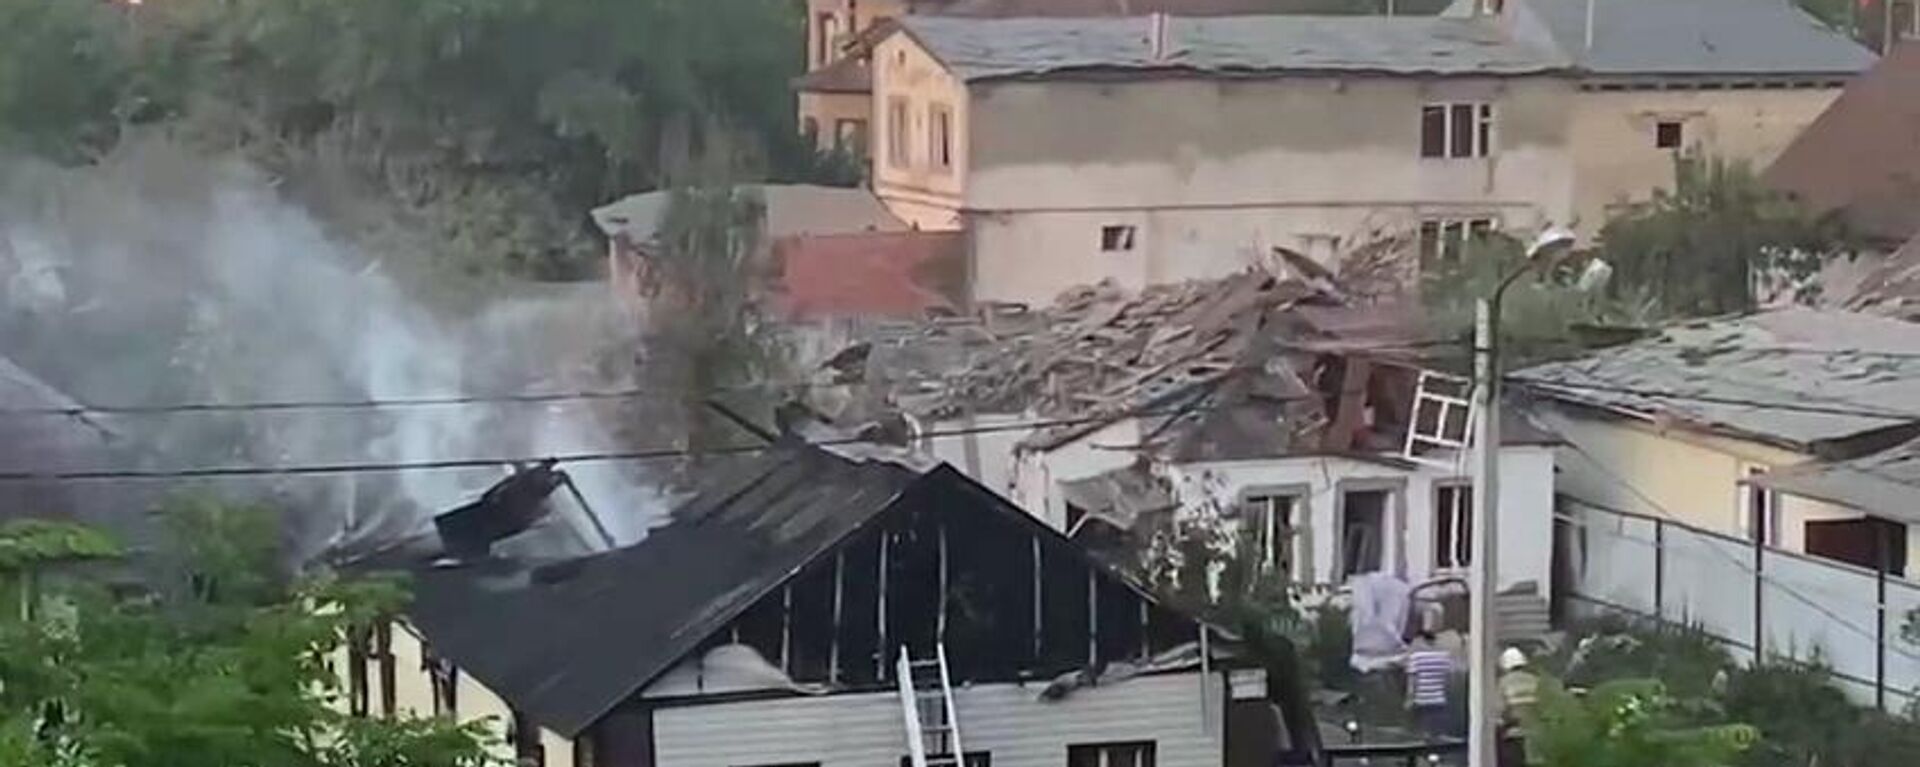 A screenshot from a video depicting a house in Belgorod, Russia, destroyed by the Ukrainian missile strike on 3 July 2022. - Sputnik International, 1920, 03.07.2022